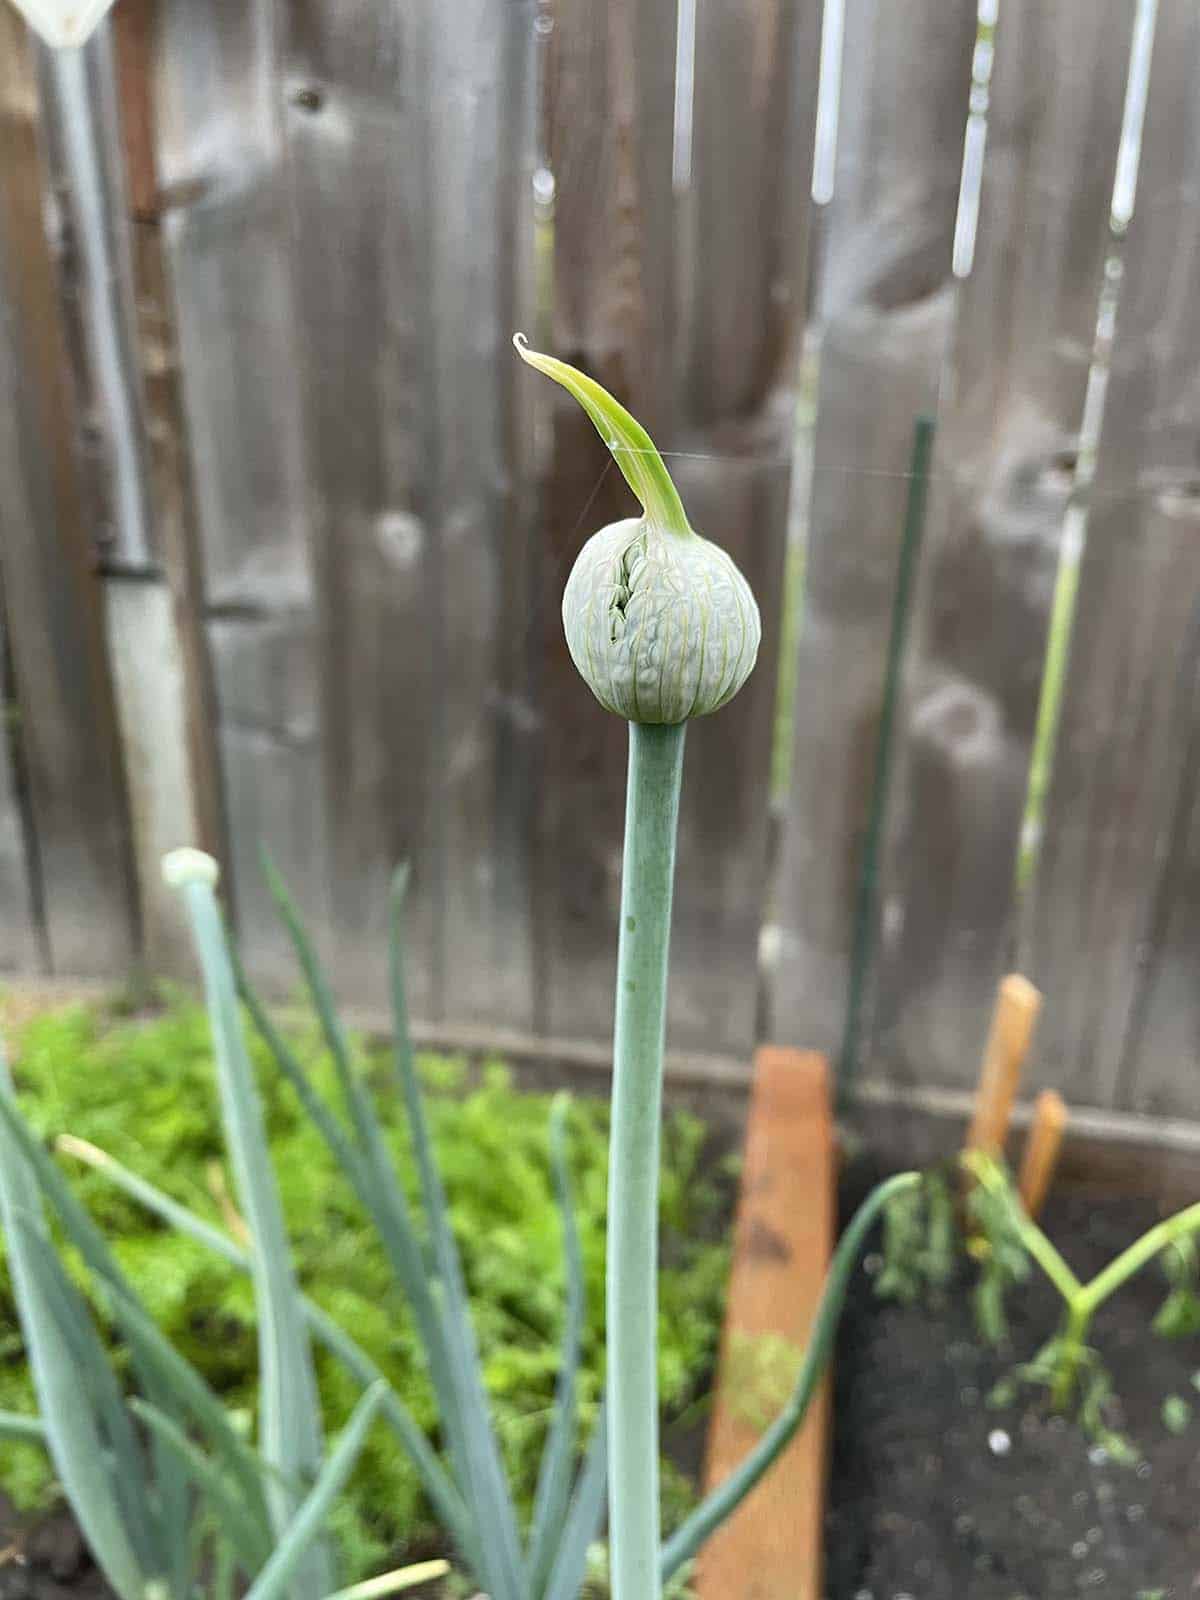 An onion that has bolted and with a stalk and flower pod opening up with seeds inside.